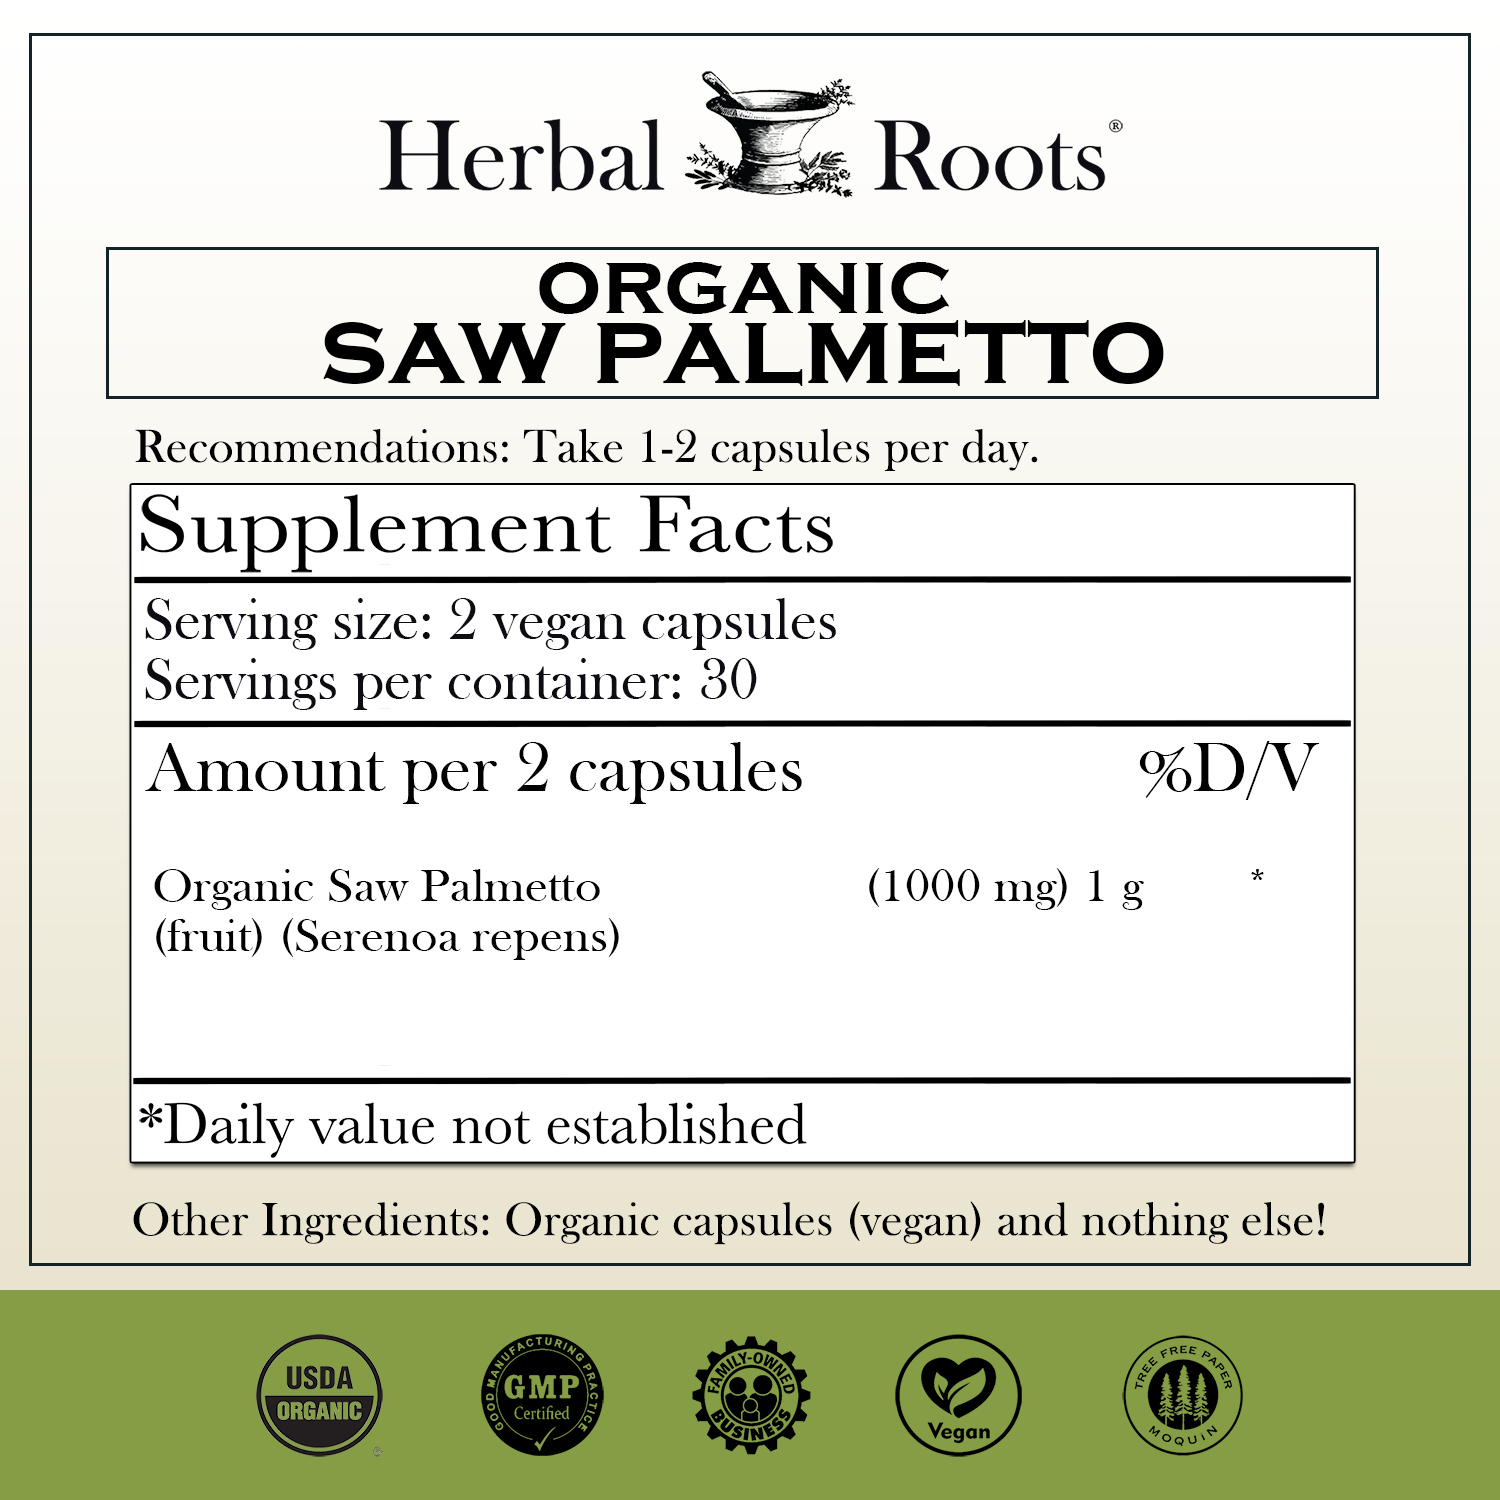 Herbal Roots Organic Saw Palmetto Supplement Facts